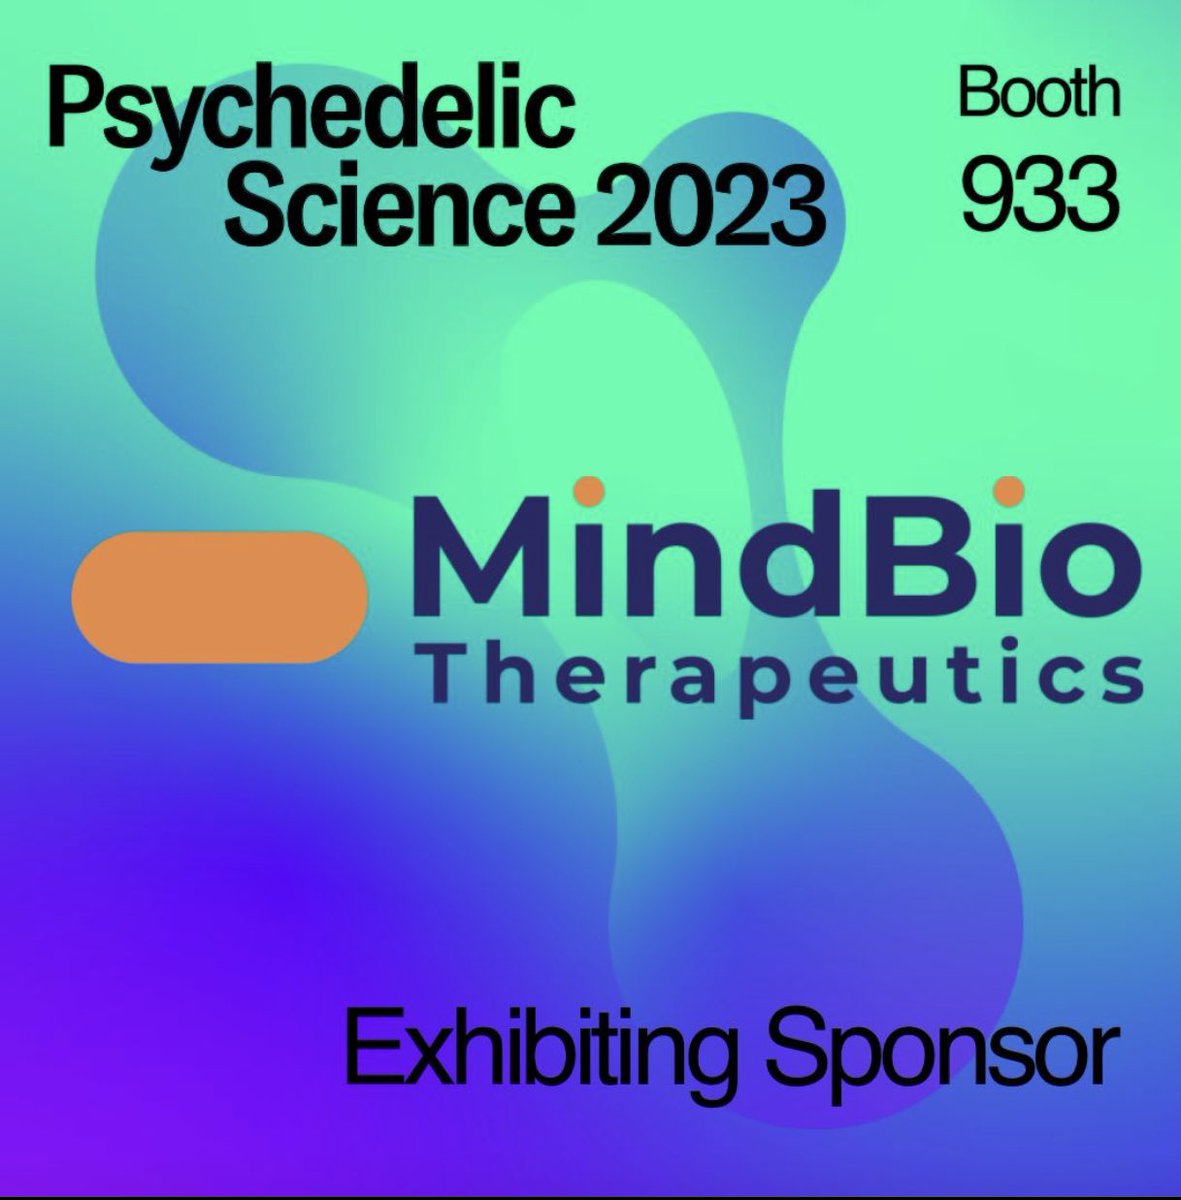 MindBio Therapeutics will be at Multidisciplinary Association for Psychedelic Studies (MAPS)Psychedelic Science 2023 in Denver this week, talking about #lsd #microdosing and our Phase I & II Clinical Trials. Come chat with us.

#science #clinicaltrials